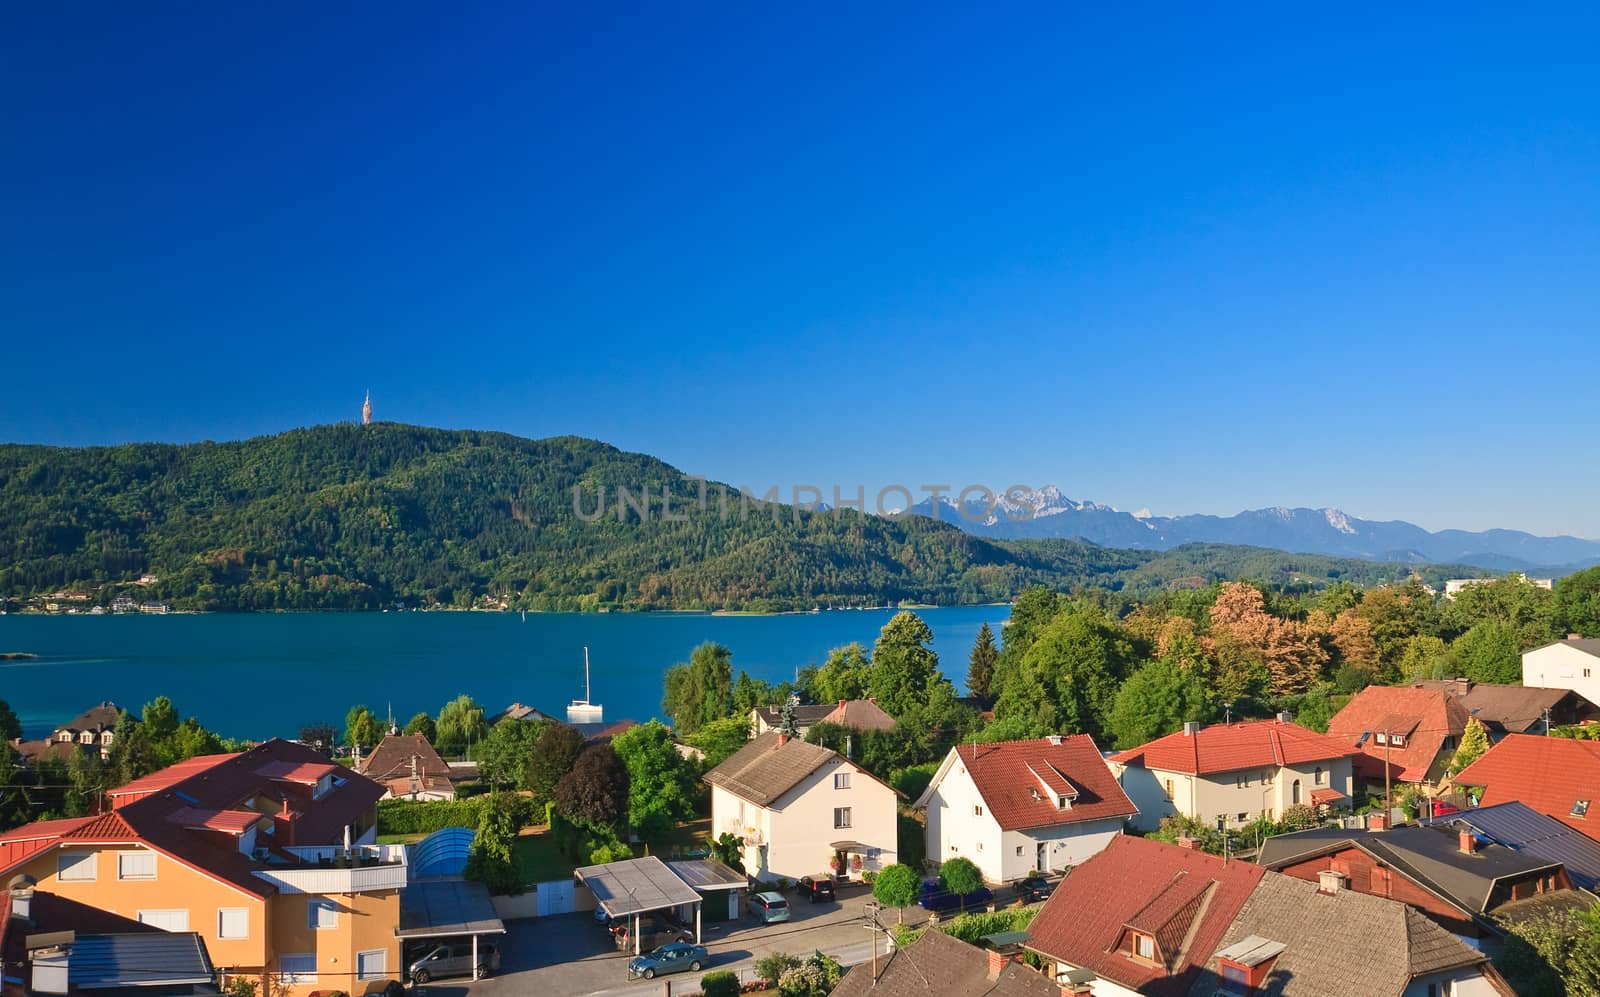 Resort Portschach am Worthersee and Lake Worthersee. Austria by nikolpetr